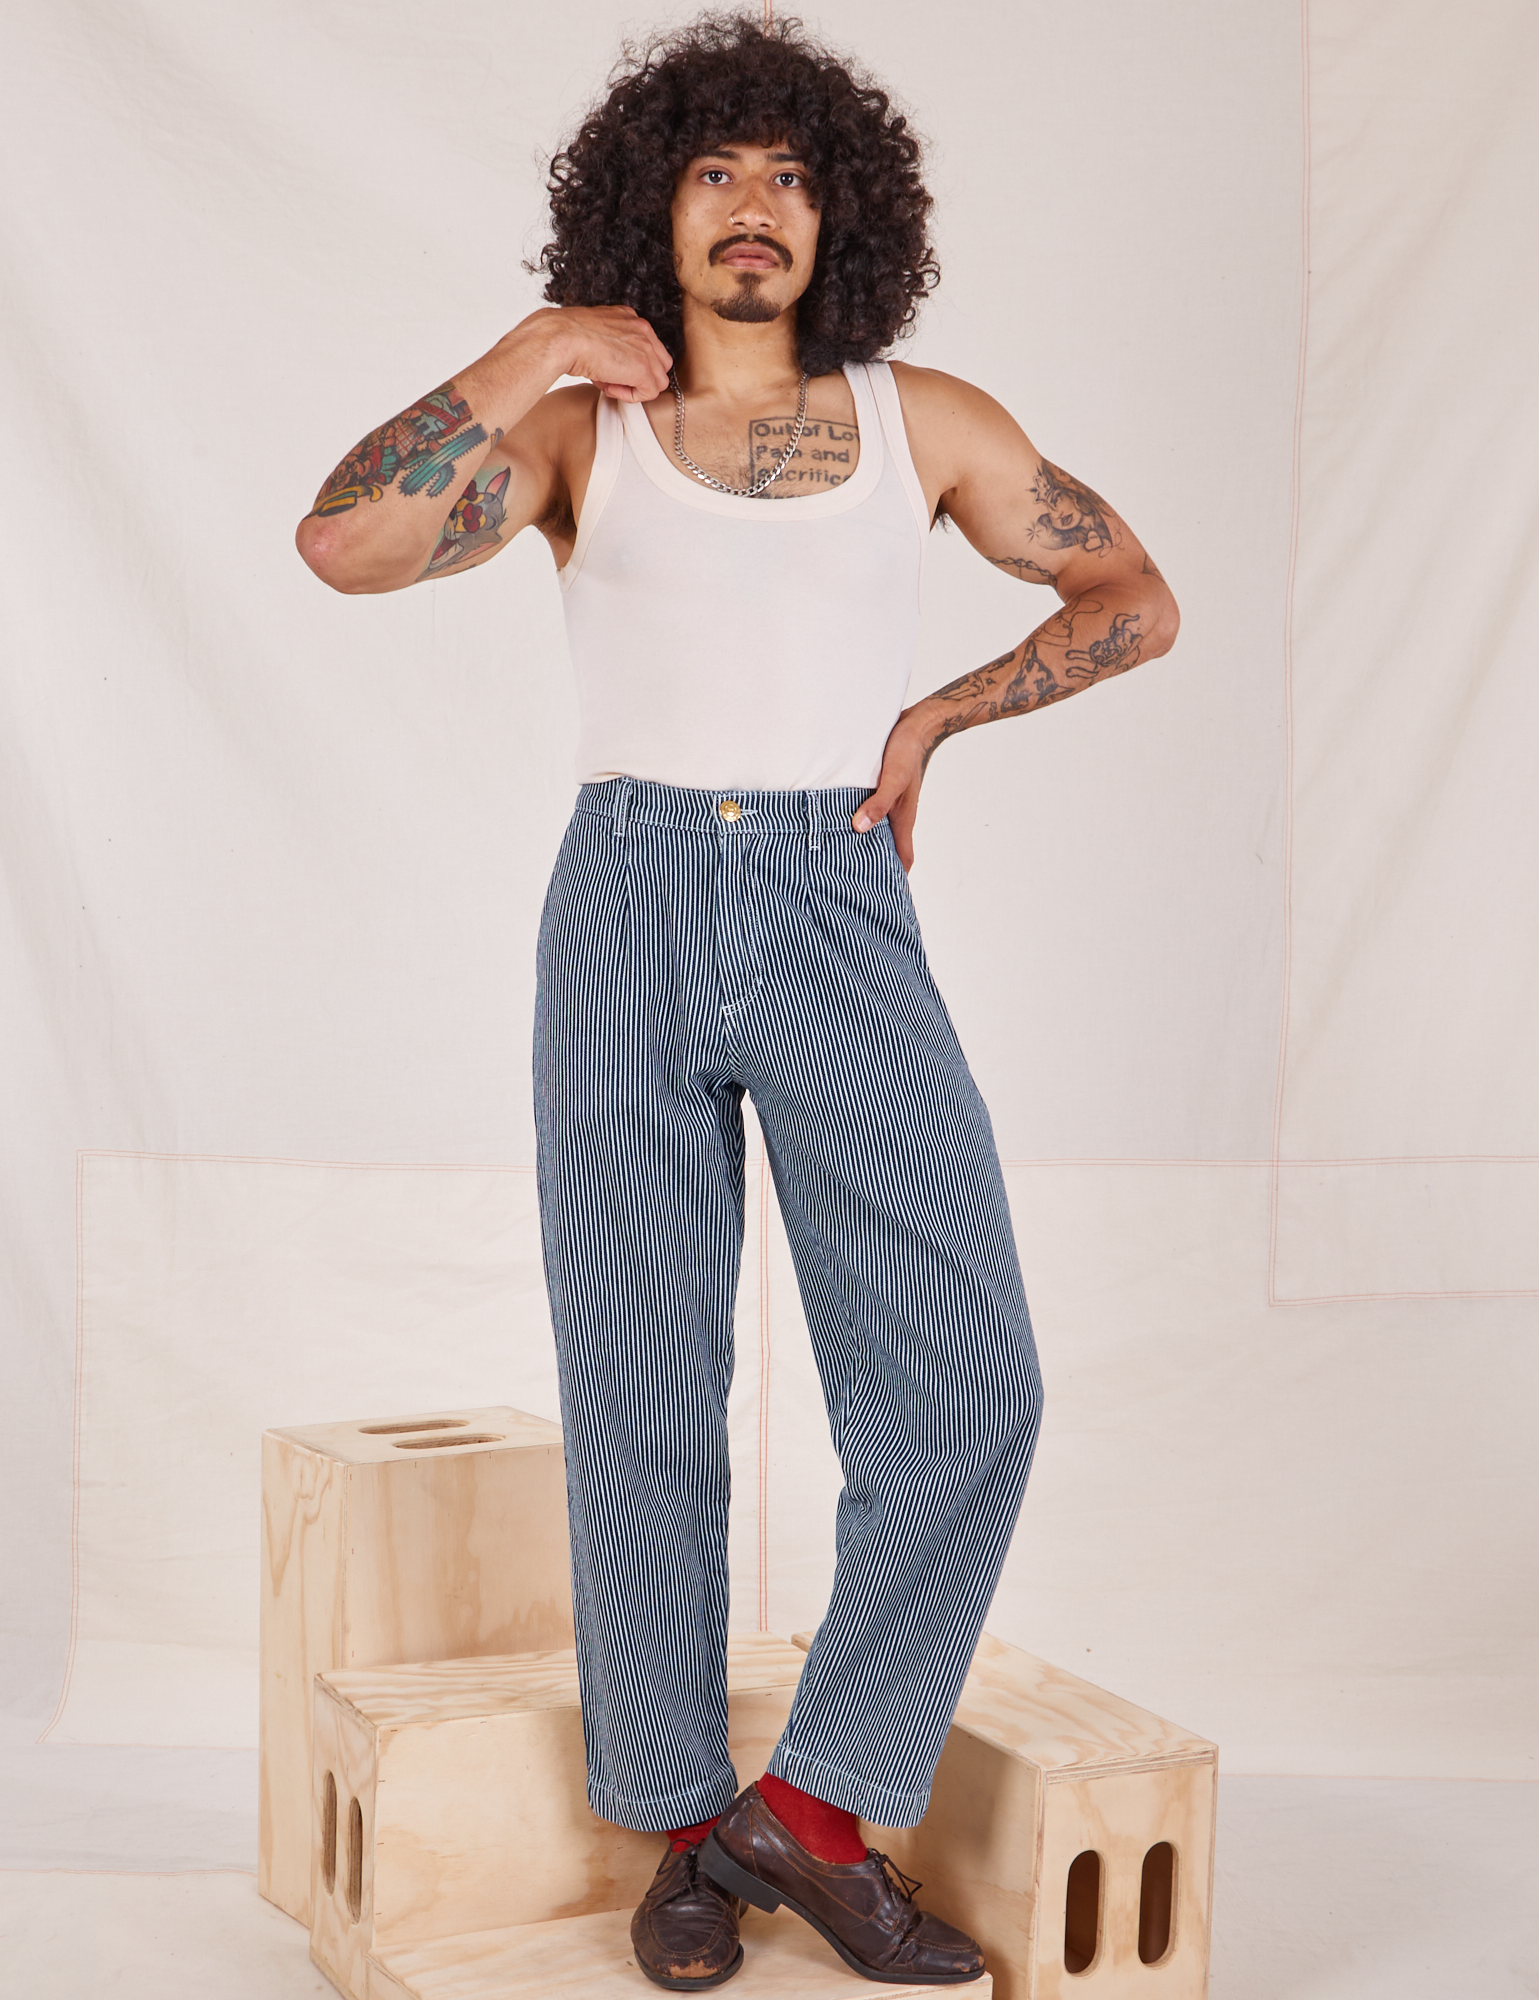 Jesse is 5&#39;8&quot; and wearing XXS Denim Trouser Jeans in Railroad Stripe paired with a vintage off-white Tank Top